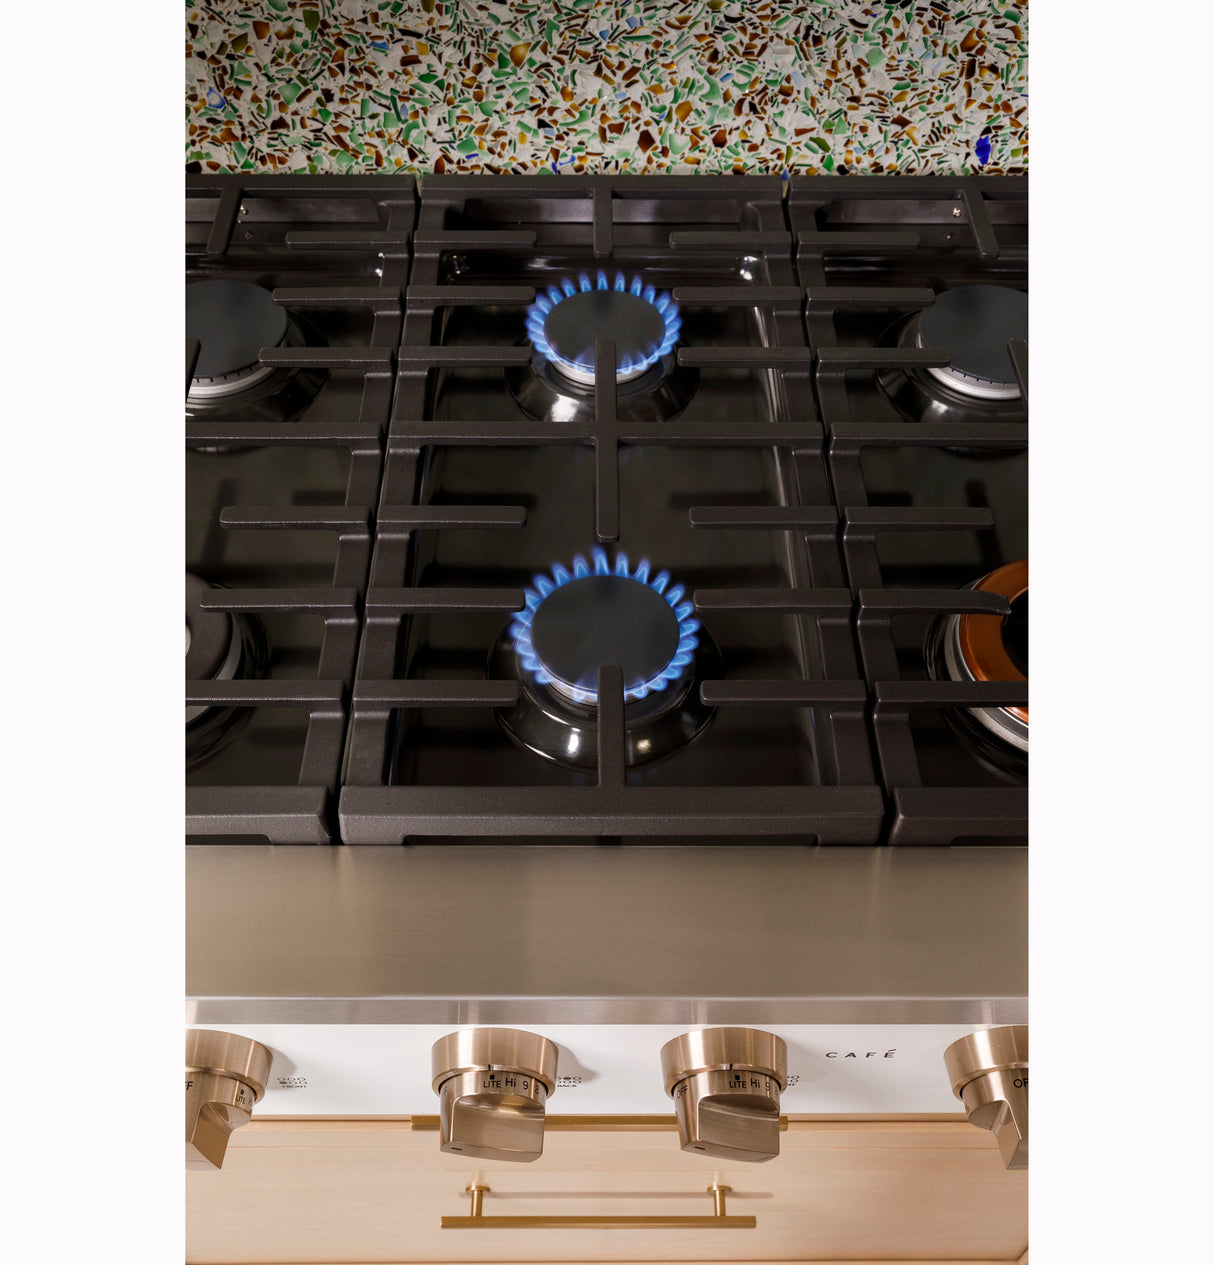 Caf(eback)(TM) 36" Commercial-Style Gas Rangetop with 6 Burners (Natural Gas) - (CGU366P3TD1)